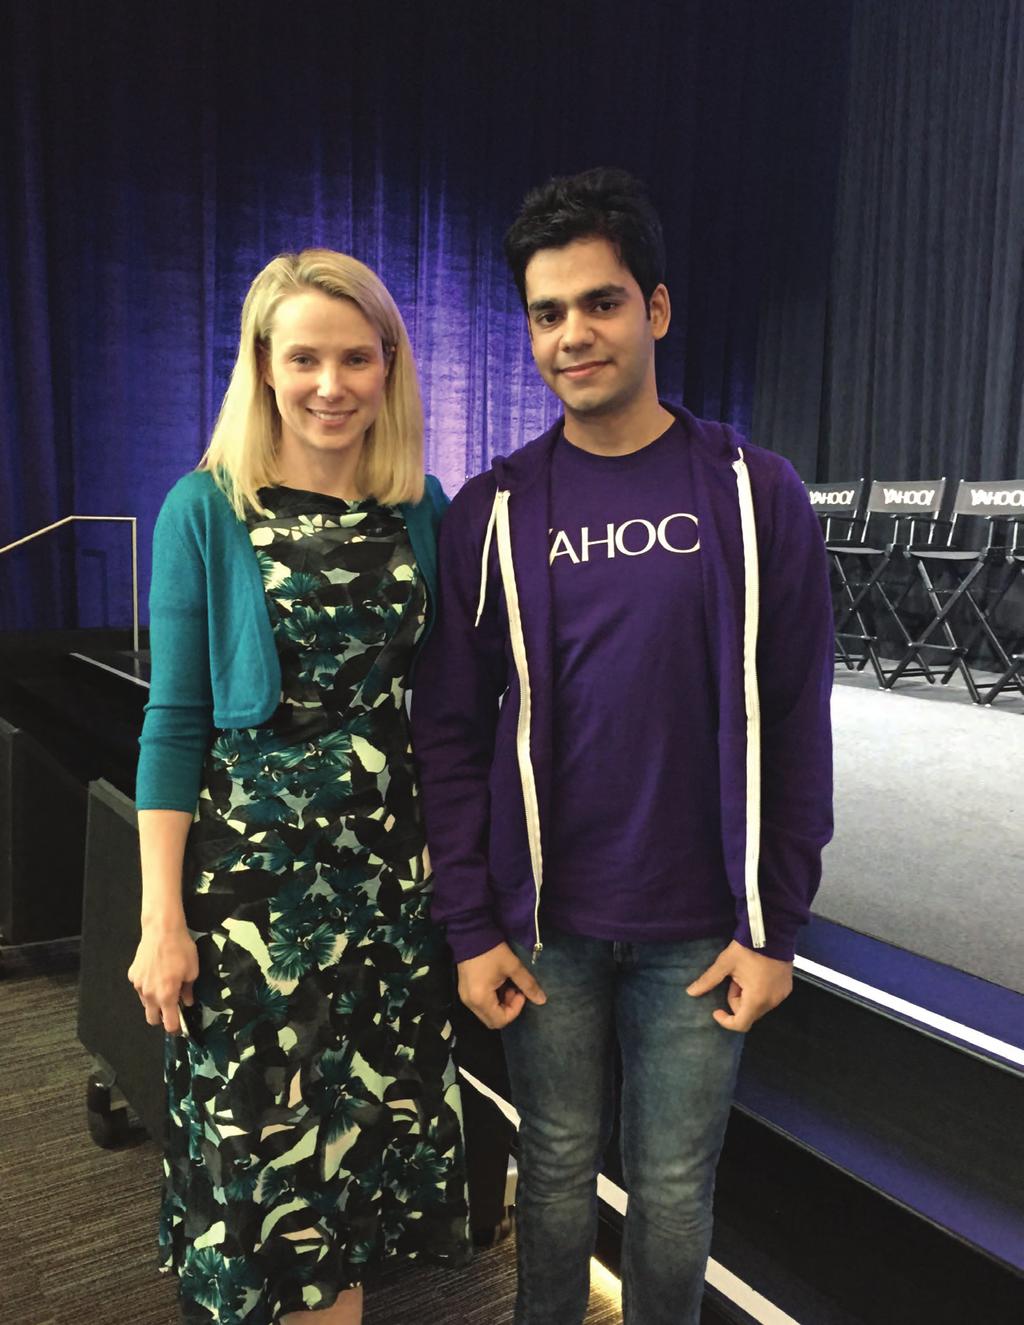 IntraNet January 2016 Volume 7 Annual News letter of the Model Institute of Engineering & Technology MIET Saajan Sridhar a 2014 CSE passout from MIET posing with Marissa Mayer CEO of Yahoo, USA